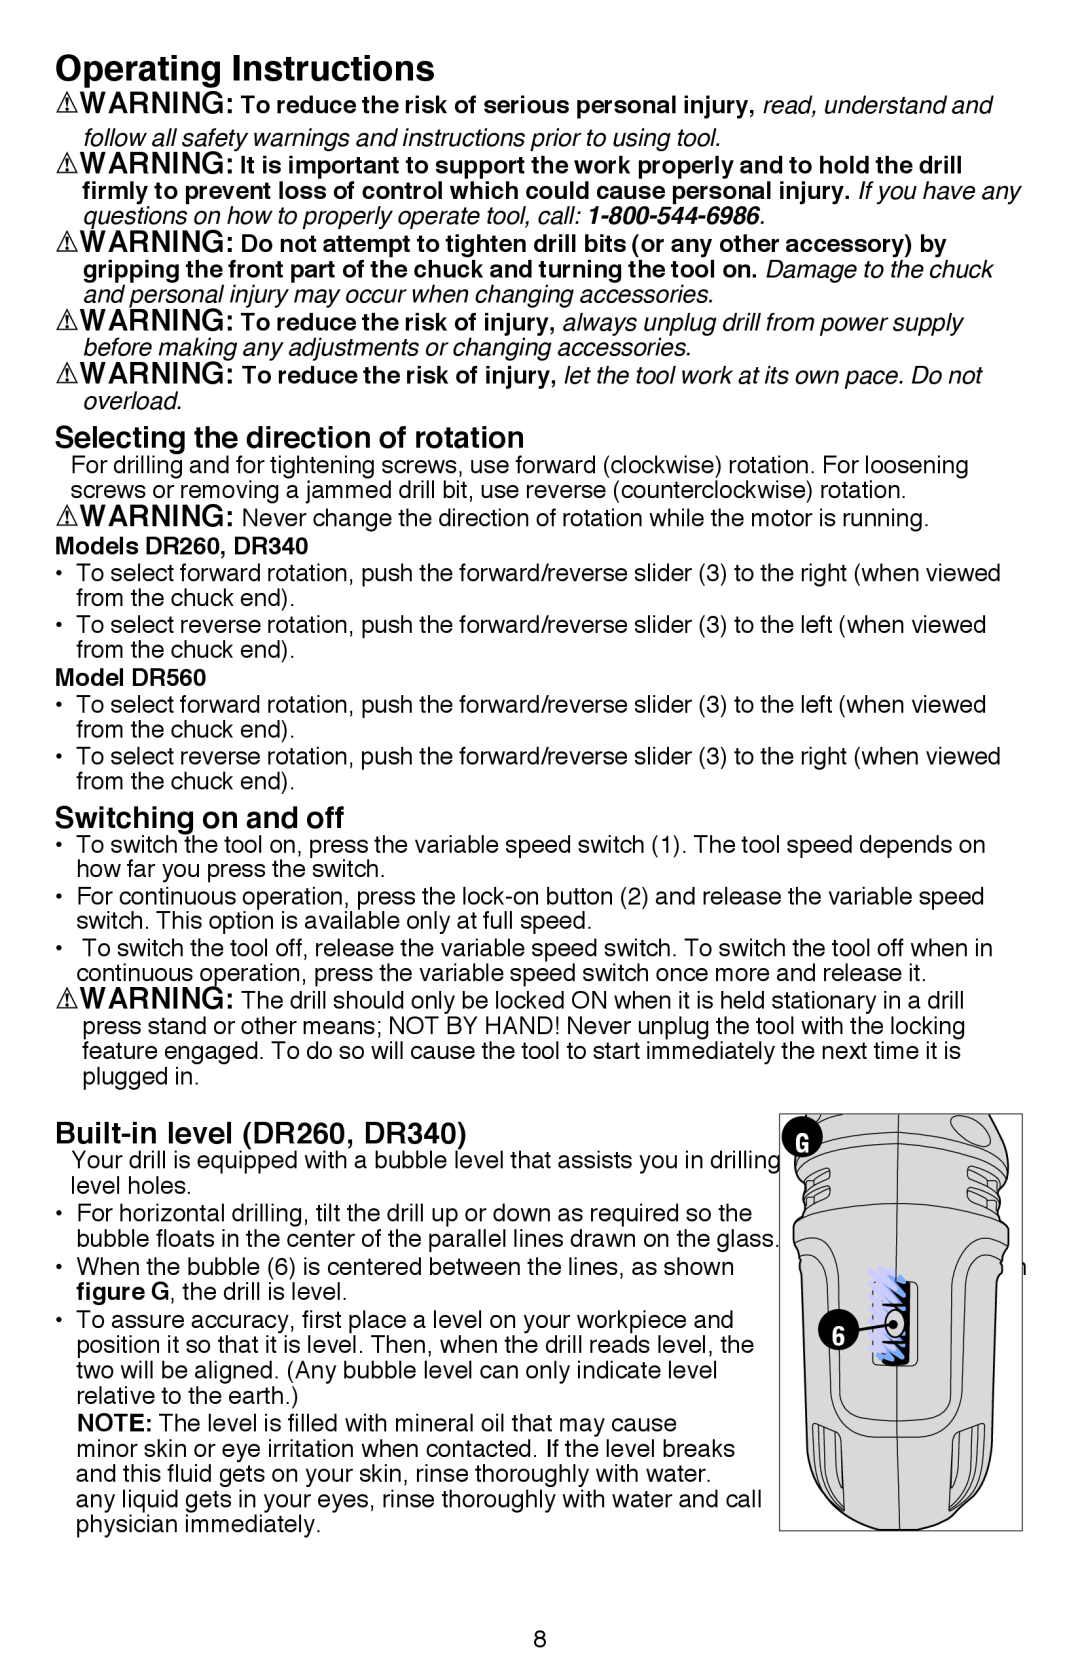 Black & Decker DR260BR instruction manual Operating Instructions, Selecting the direction of rotation, Switching on and off 